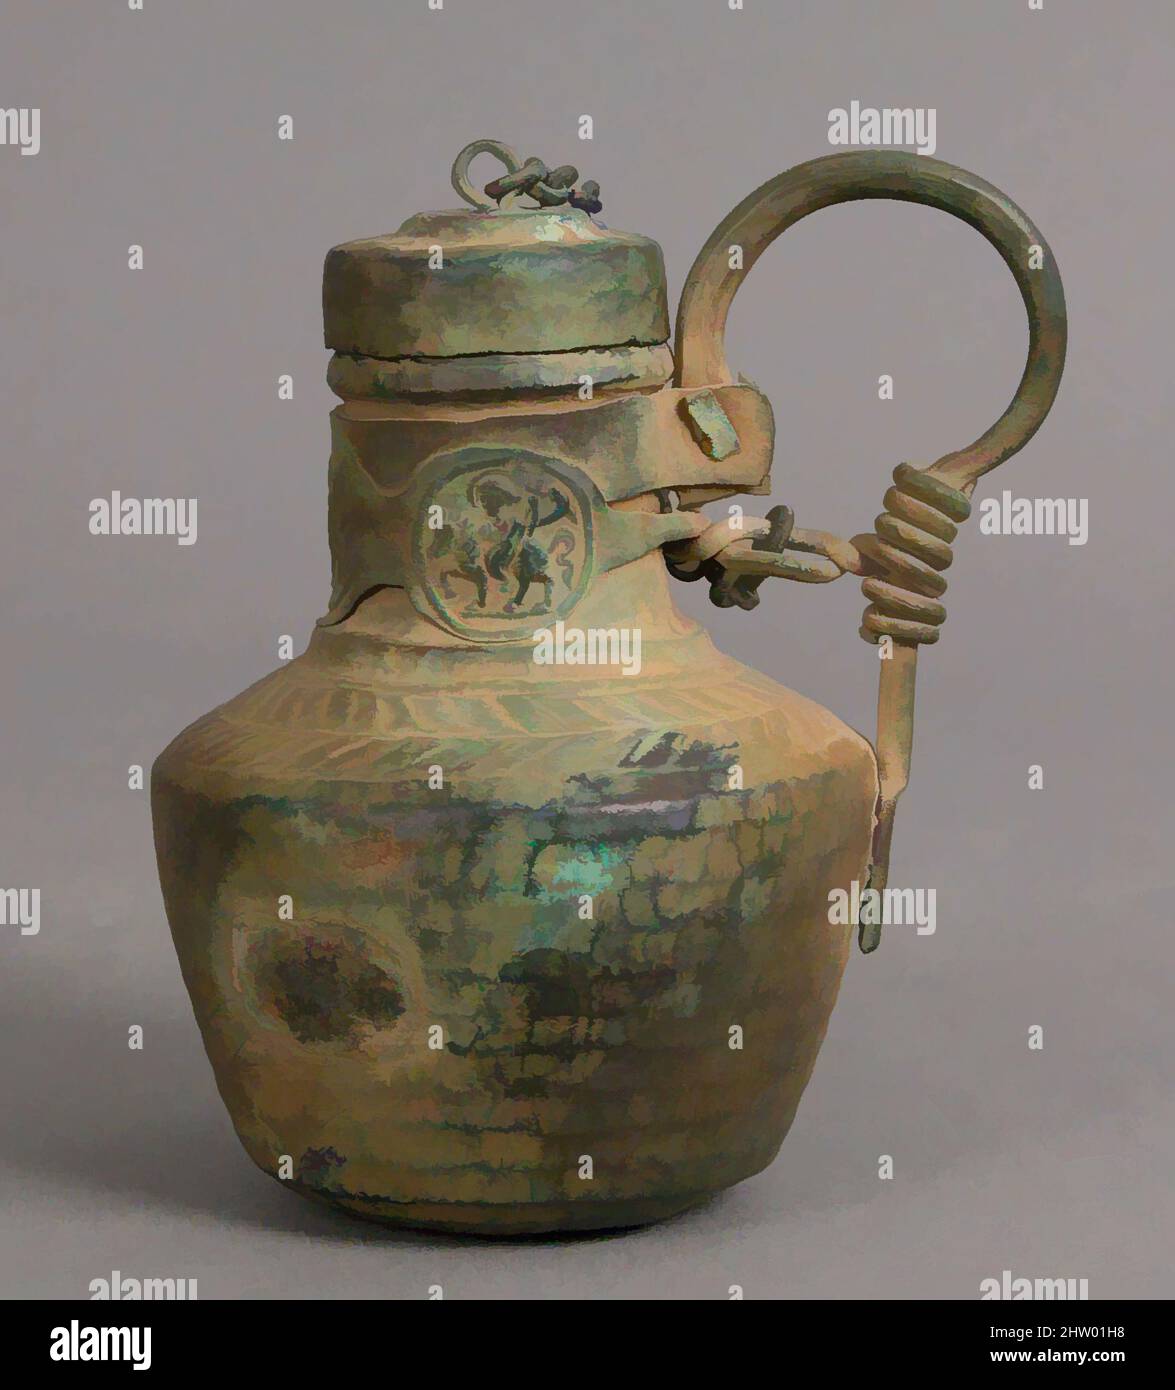 Art inspired by Jug with Medallions, 6th–8th century, Byzantine, Copper alloy, Overall: 4 15/16 x 4 x 3 3/8 in. (12.5 x 10.2 x 8.6 cm), Metalwork-Copper, The medallions wrapping around the neck of this jug, which was probably used to store liquids, are decorated with images of mounted, Classic works modernized by Artotop with a splash of modernity. Shapes, color and value, eye-catching visual impact on art. Emotions through freedom of artworks in a contemporary way. A timeless message pursuing a wildly creative new direction. Artists turning to the digital medium and creating the Artotop NFT Stock Photo